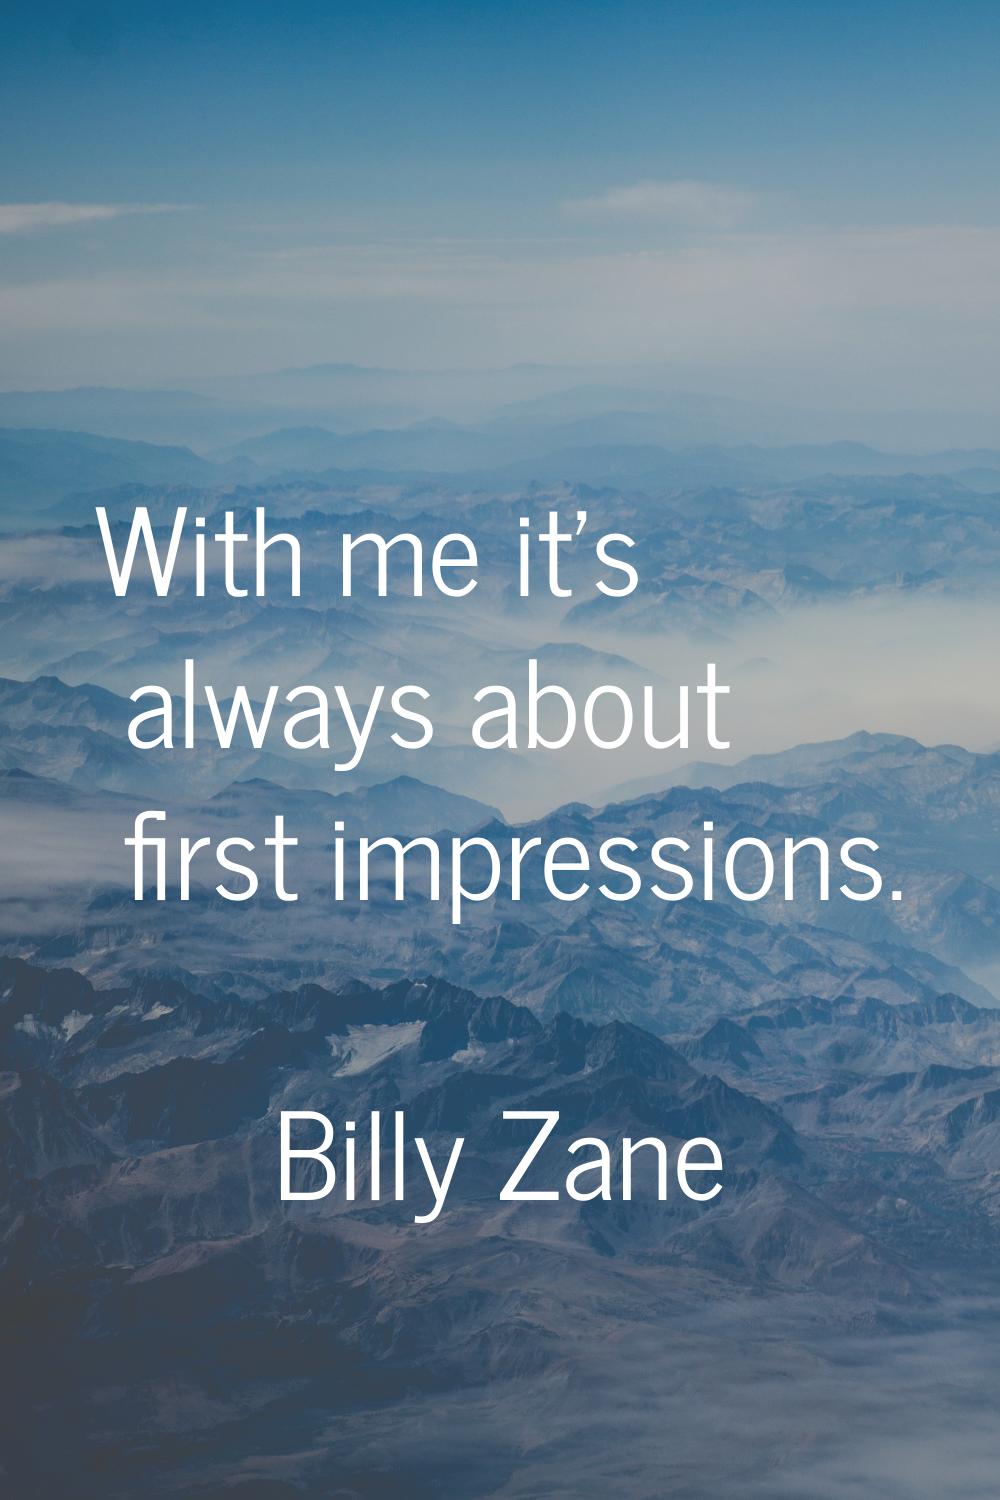 With me it's always about first impressions.